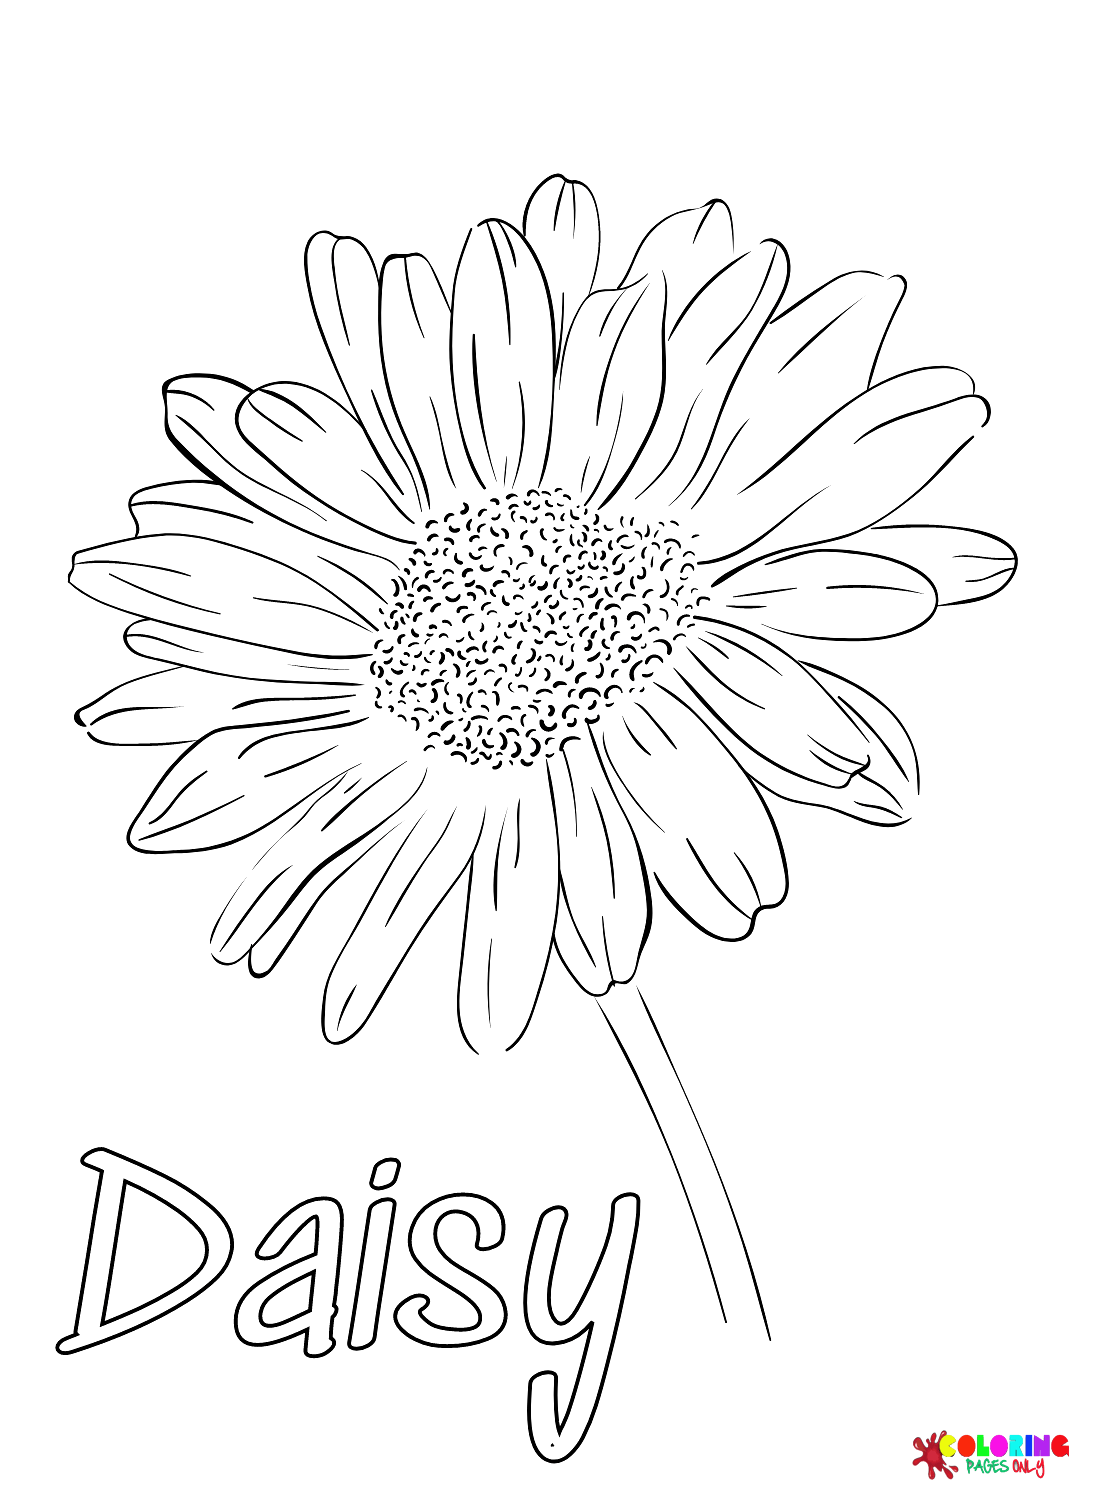 Daisy Flower Coloring Pages At Getcolorings Com Free - vrogue.co